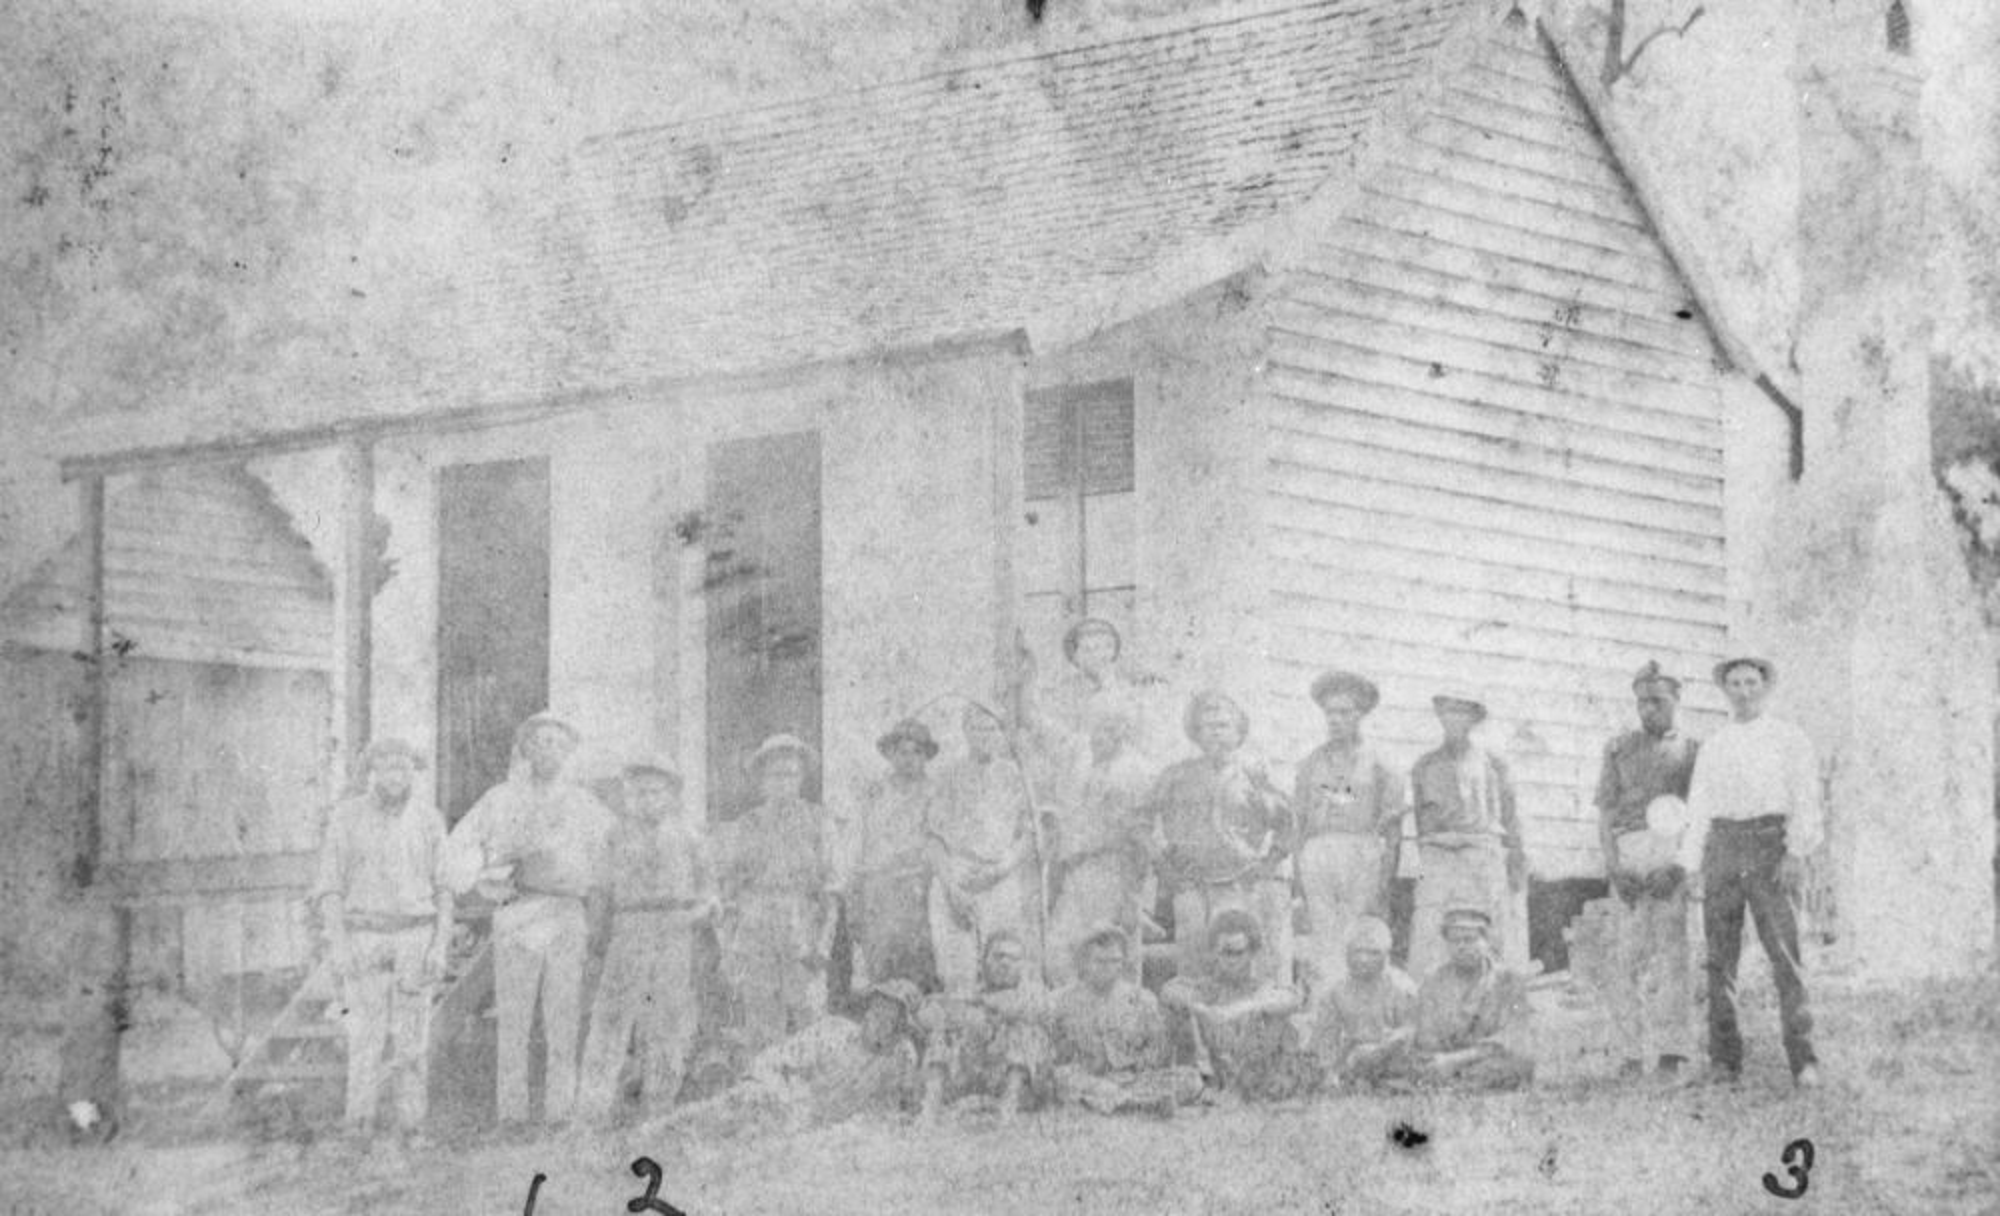 Australian South Sea Islanders at Windaroo sugar plantation, Logan City, Queensland, ca. 1890  Photographer unknown John Oxley Library, State Library of Queensland Negative no. 190513